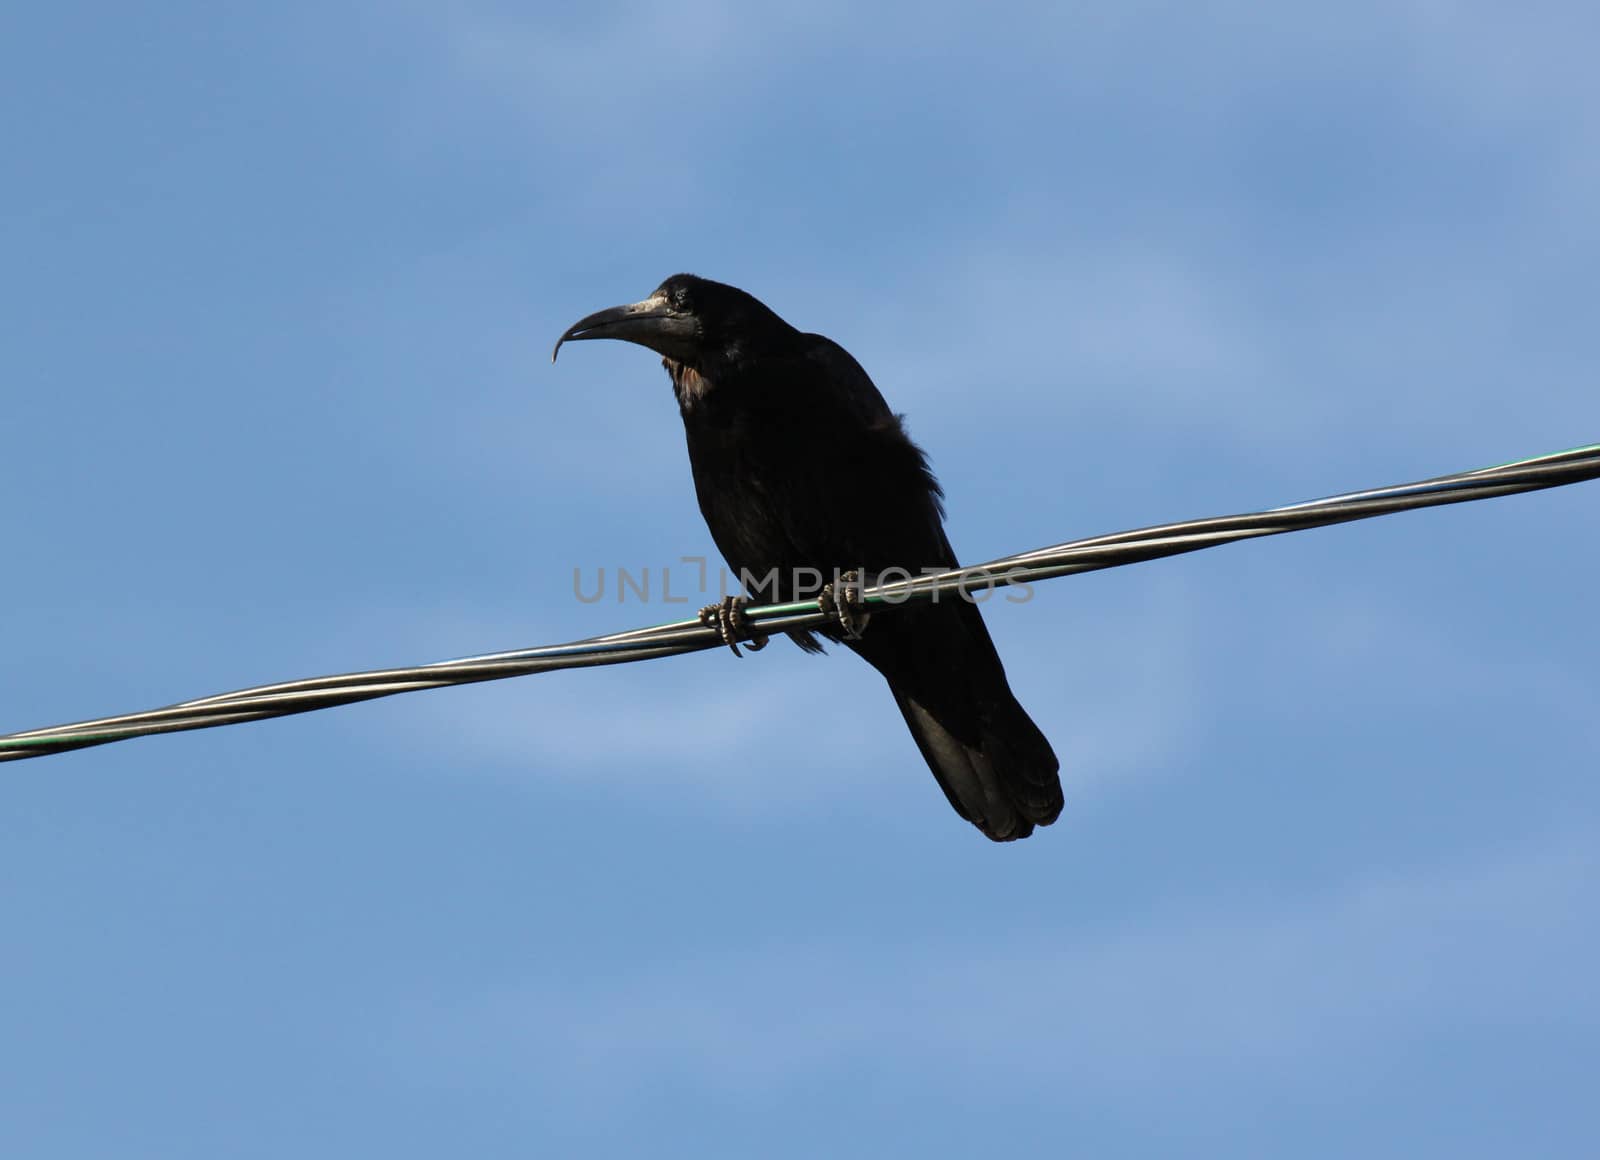 black raven on cable over blue sky